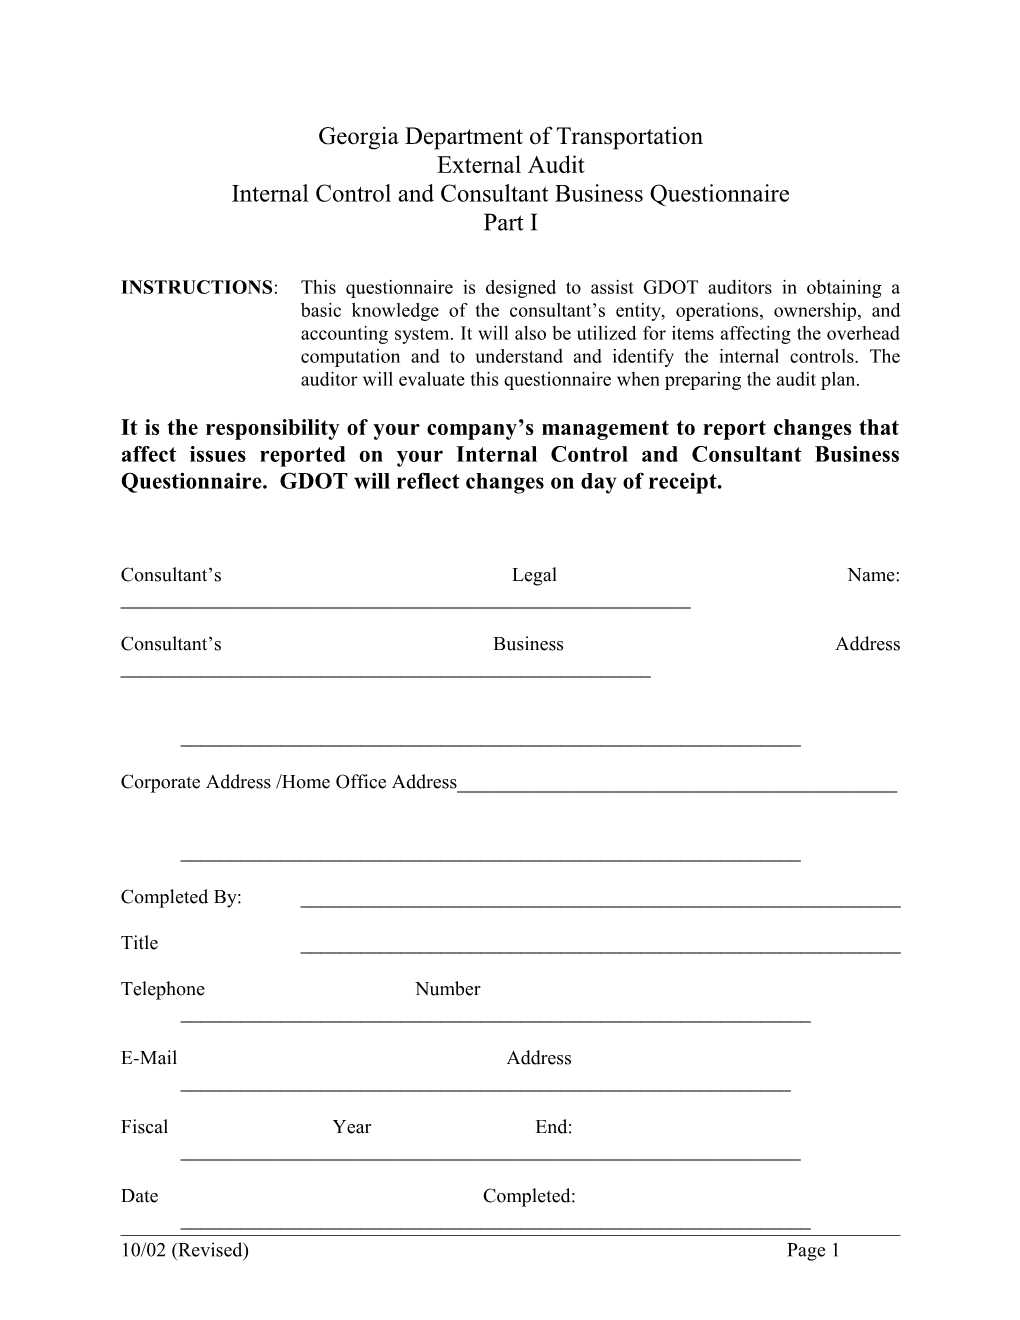 Internal Control and Consultant Business Questionnaire